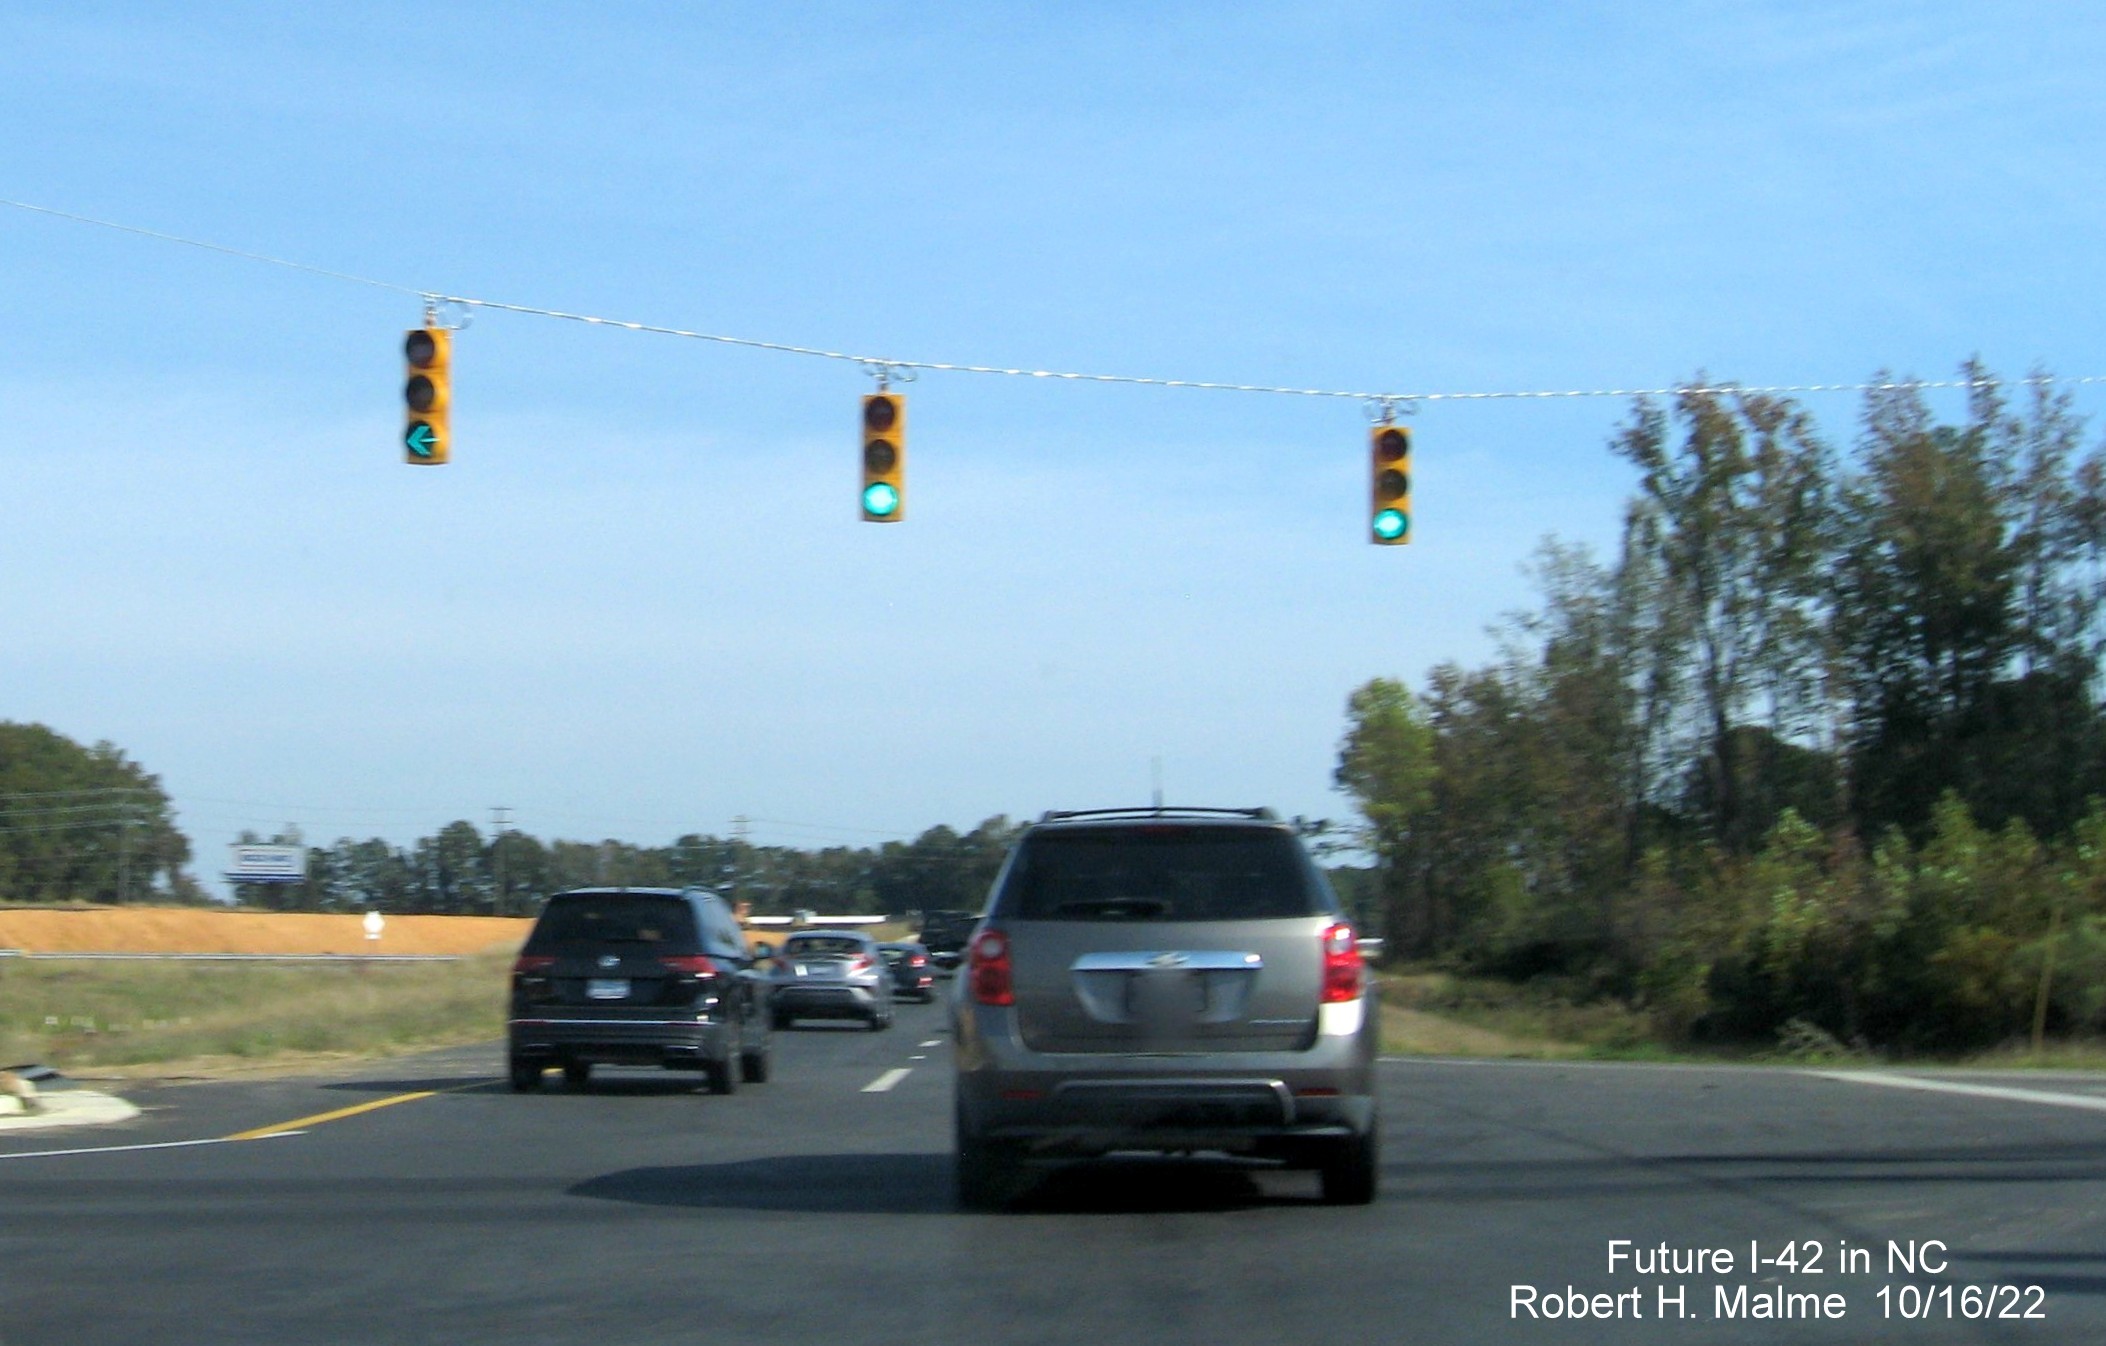 Image of US 70 East at Wilson Mills Road intersection traffic signals in Wilson Mills, October 2022